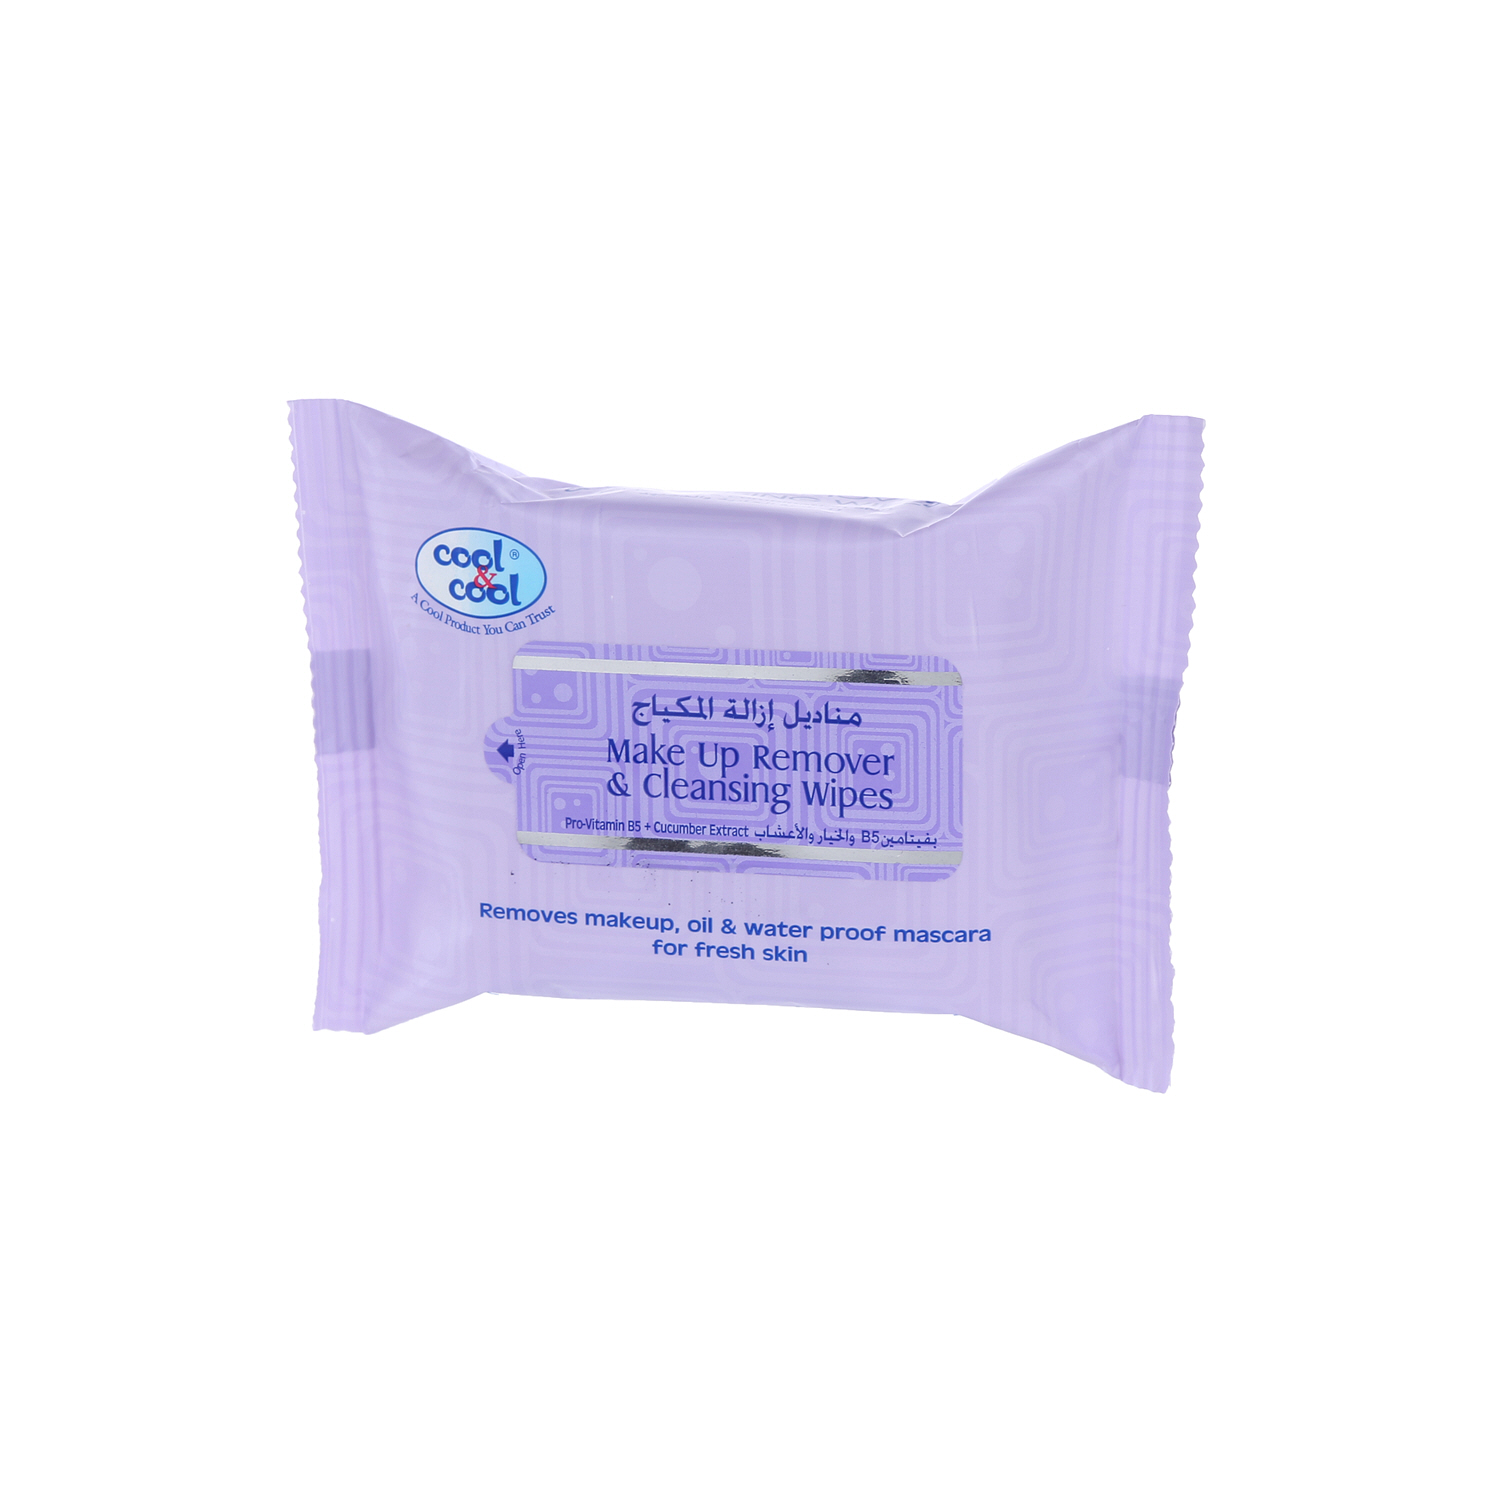 Cool & Cool Makeup Remover Tissues 25 Wipes